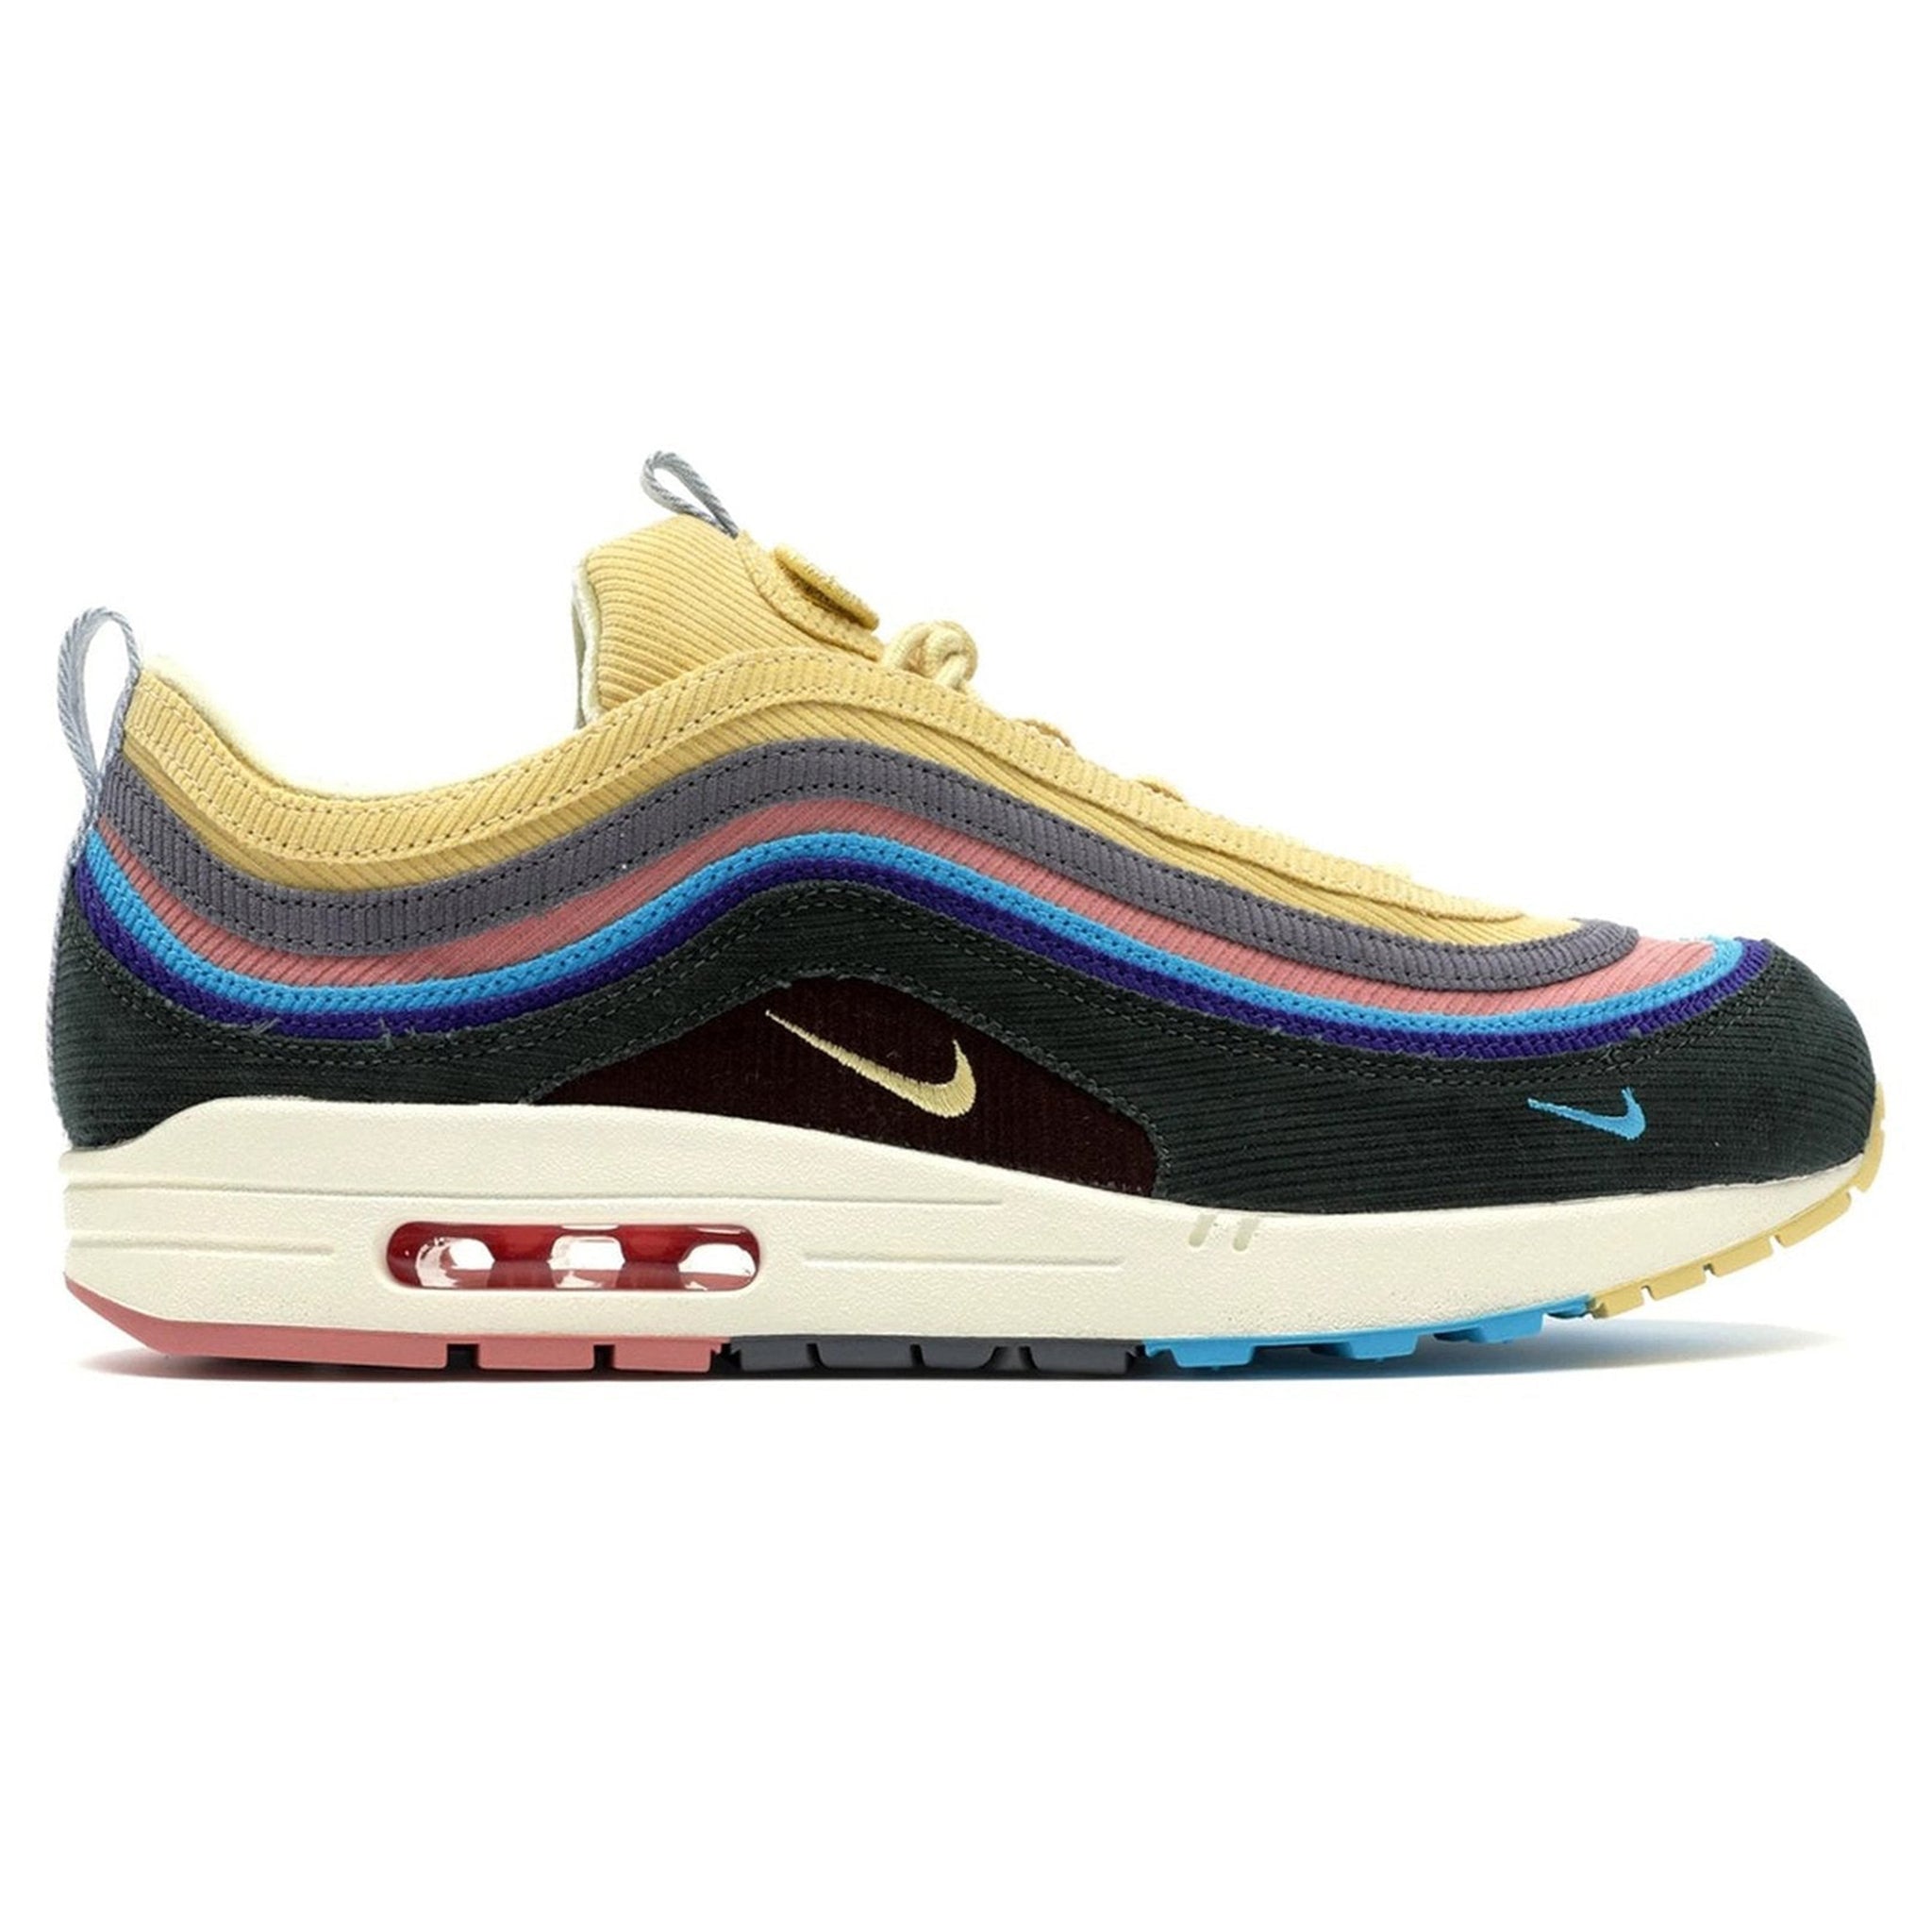 sean wotherspoon air max size 6